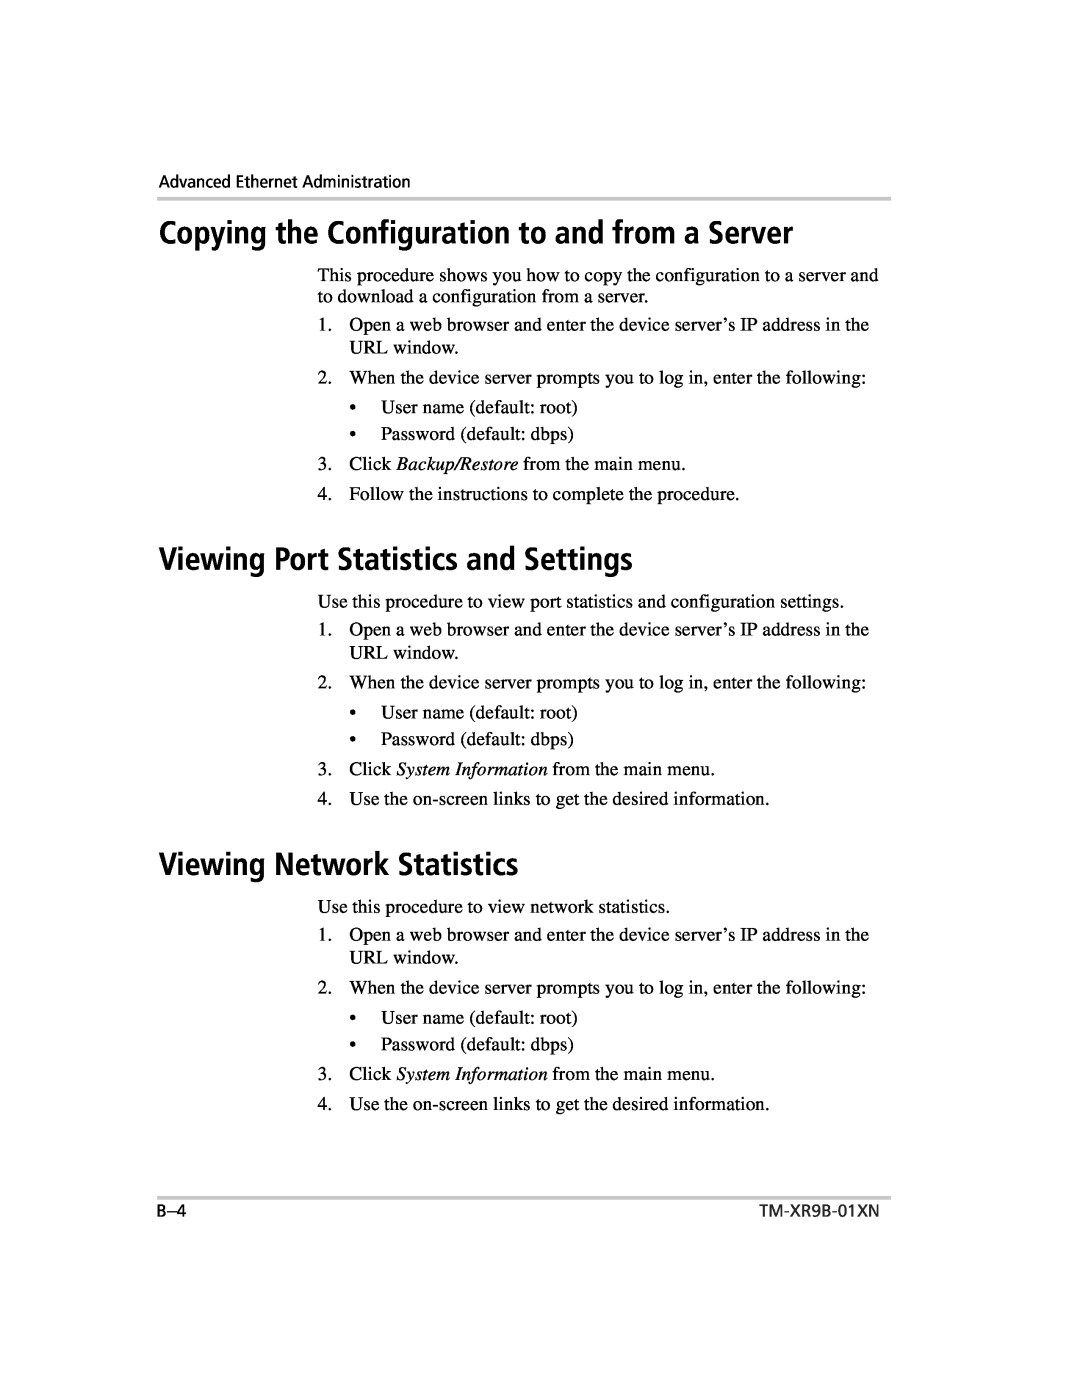 Xantrex Technology ENET-XFR3 manual Copying the Configuration to and from a Server, Viewing Port Statistics and Settings 